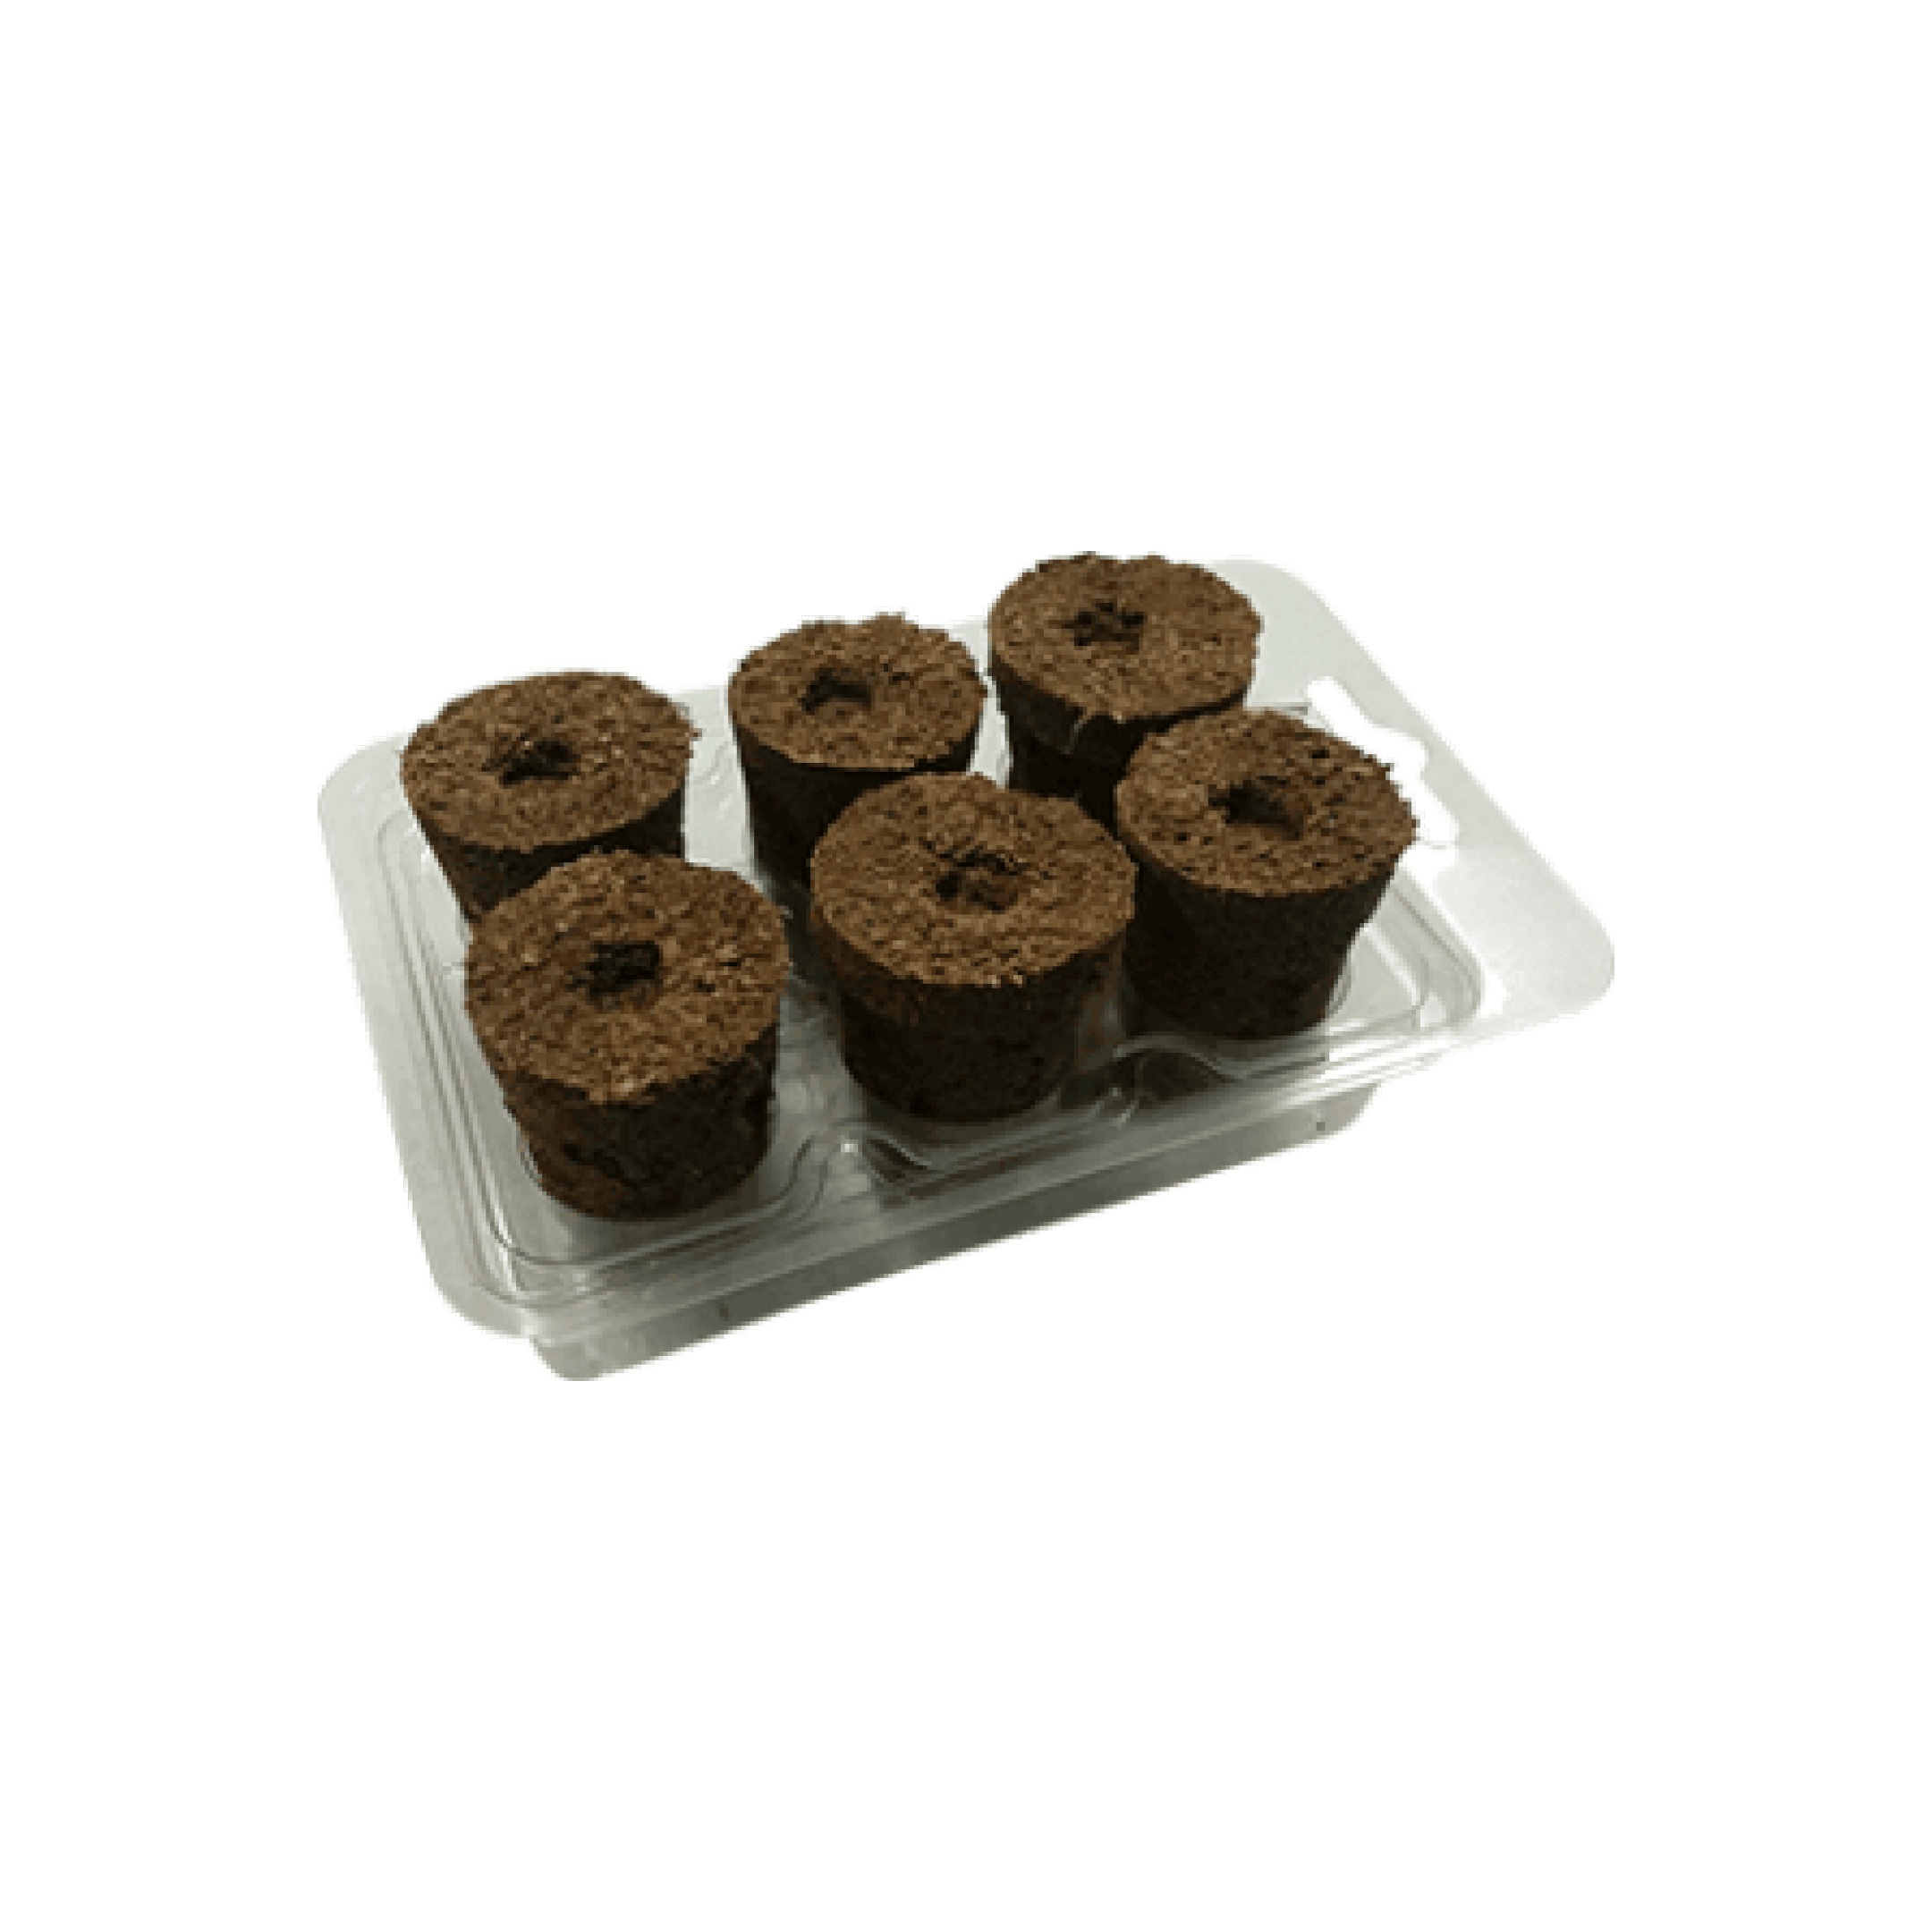 Eazy Plug Gardening Accessories > Propagation Tools > Rooting Cubes & Rockwool 6 Pack - Seed Sowing Kit Eazy Plug Rooting Cubes (12 / 24 / 77 Packs)